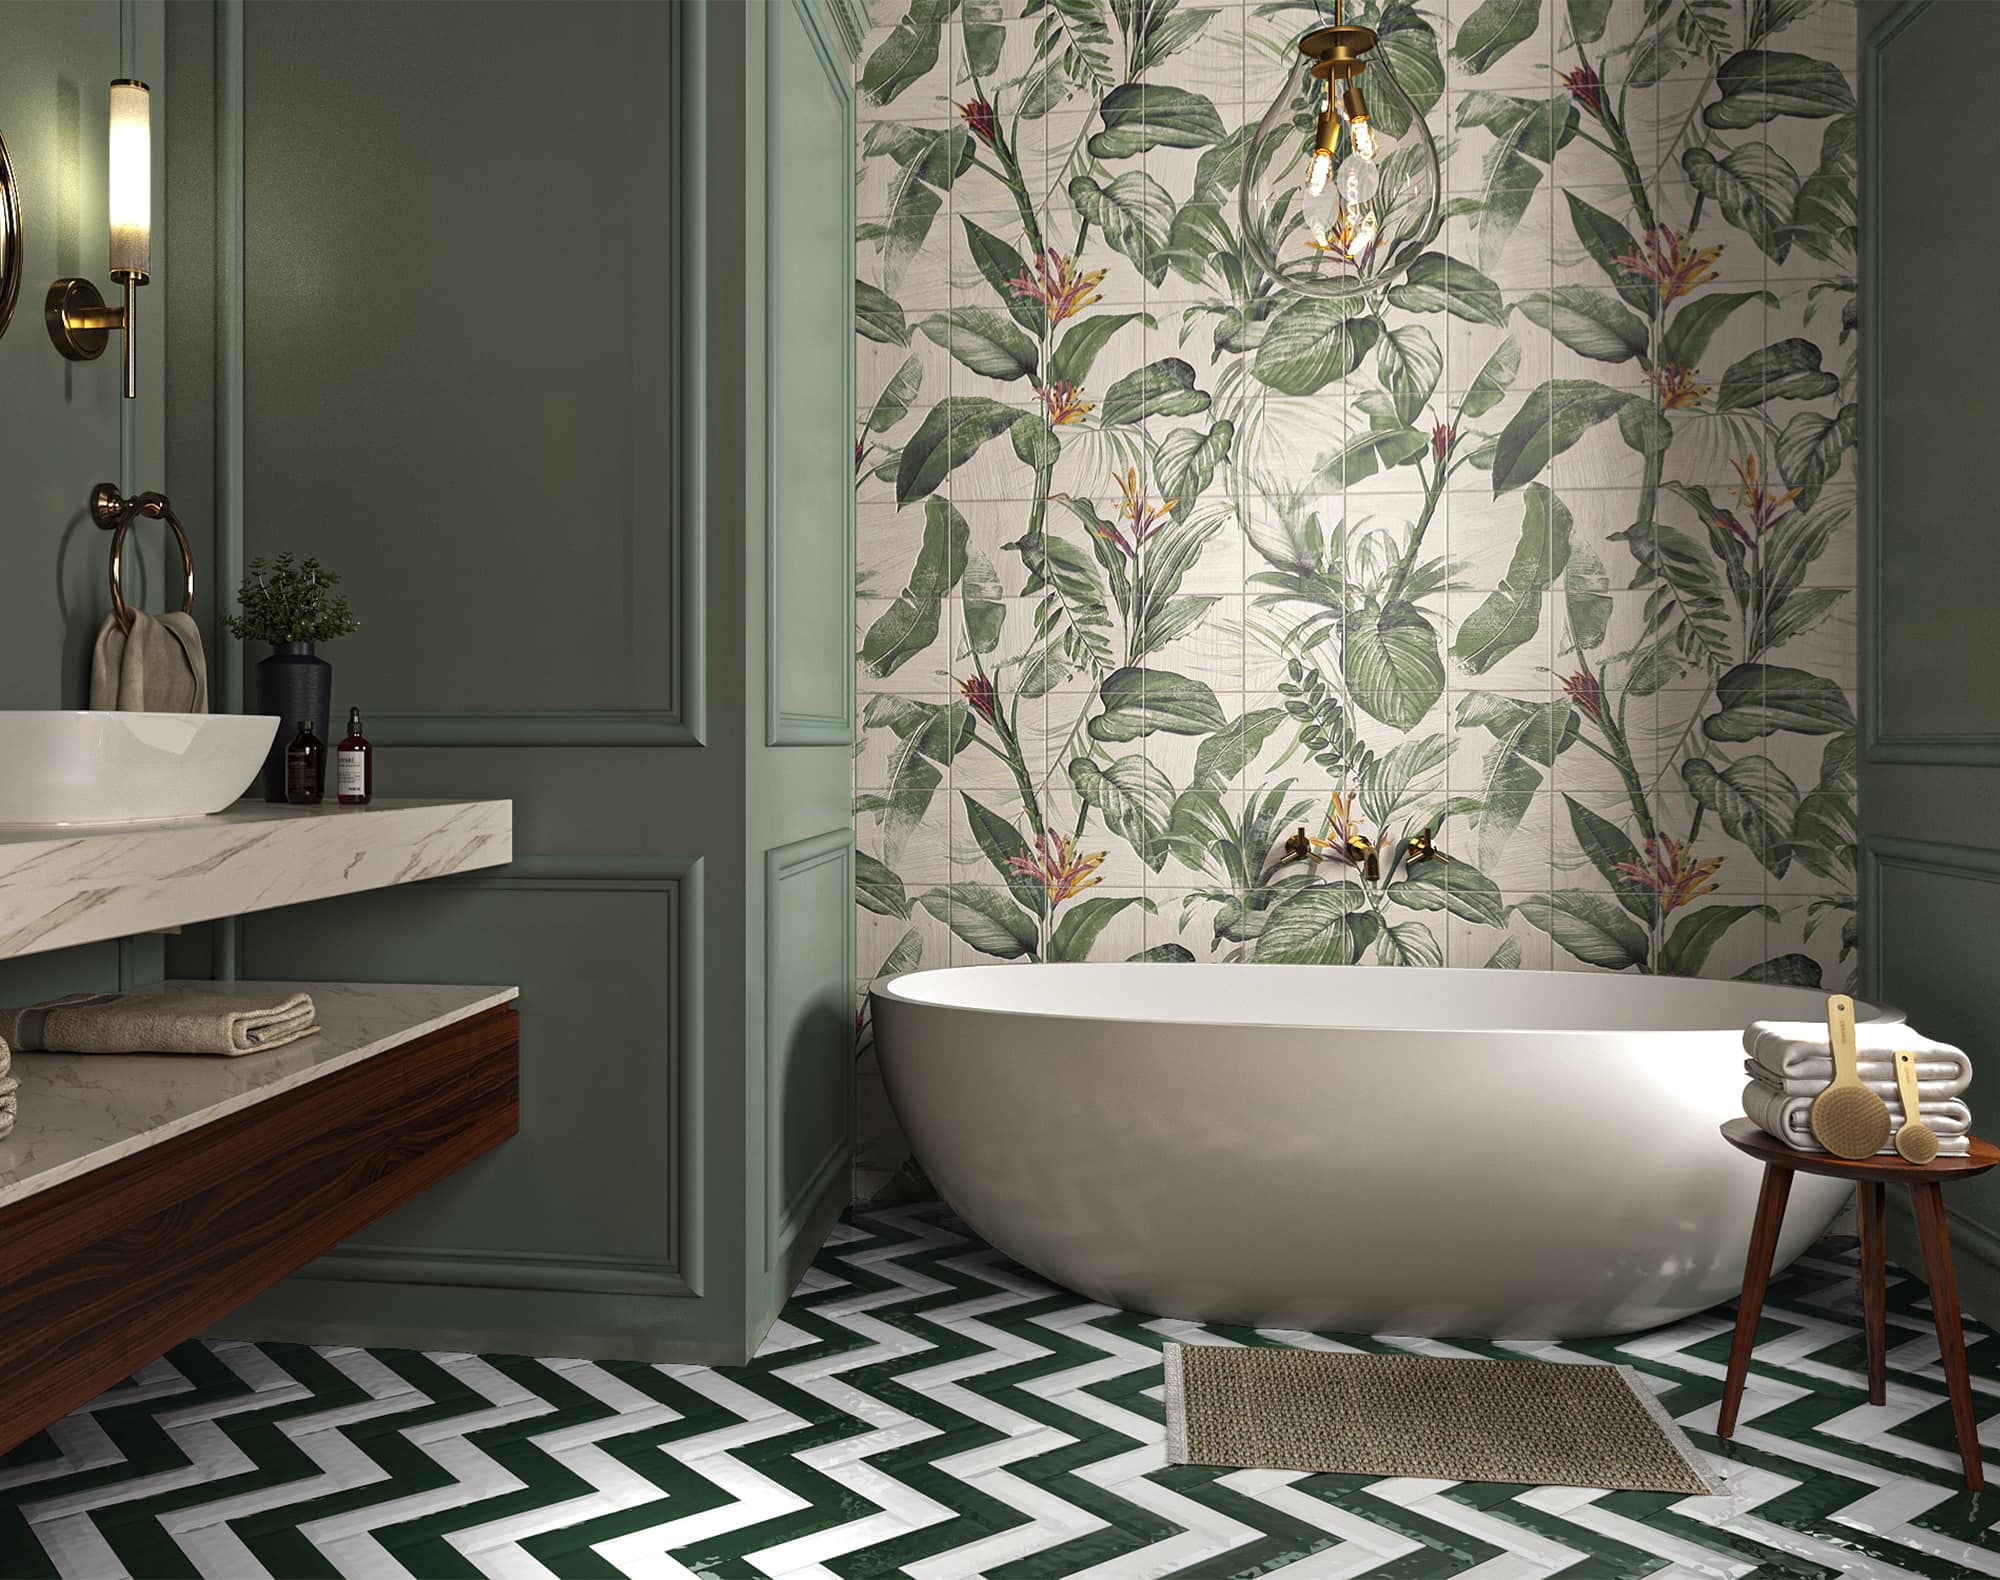 White free standing bath in front of botanical print wallpaper.